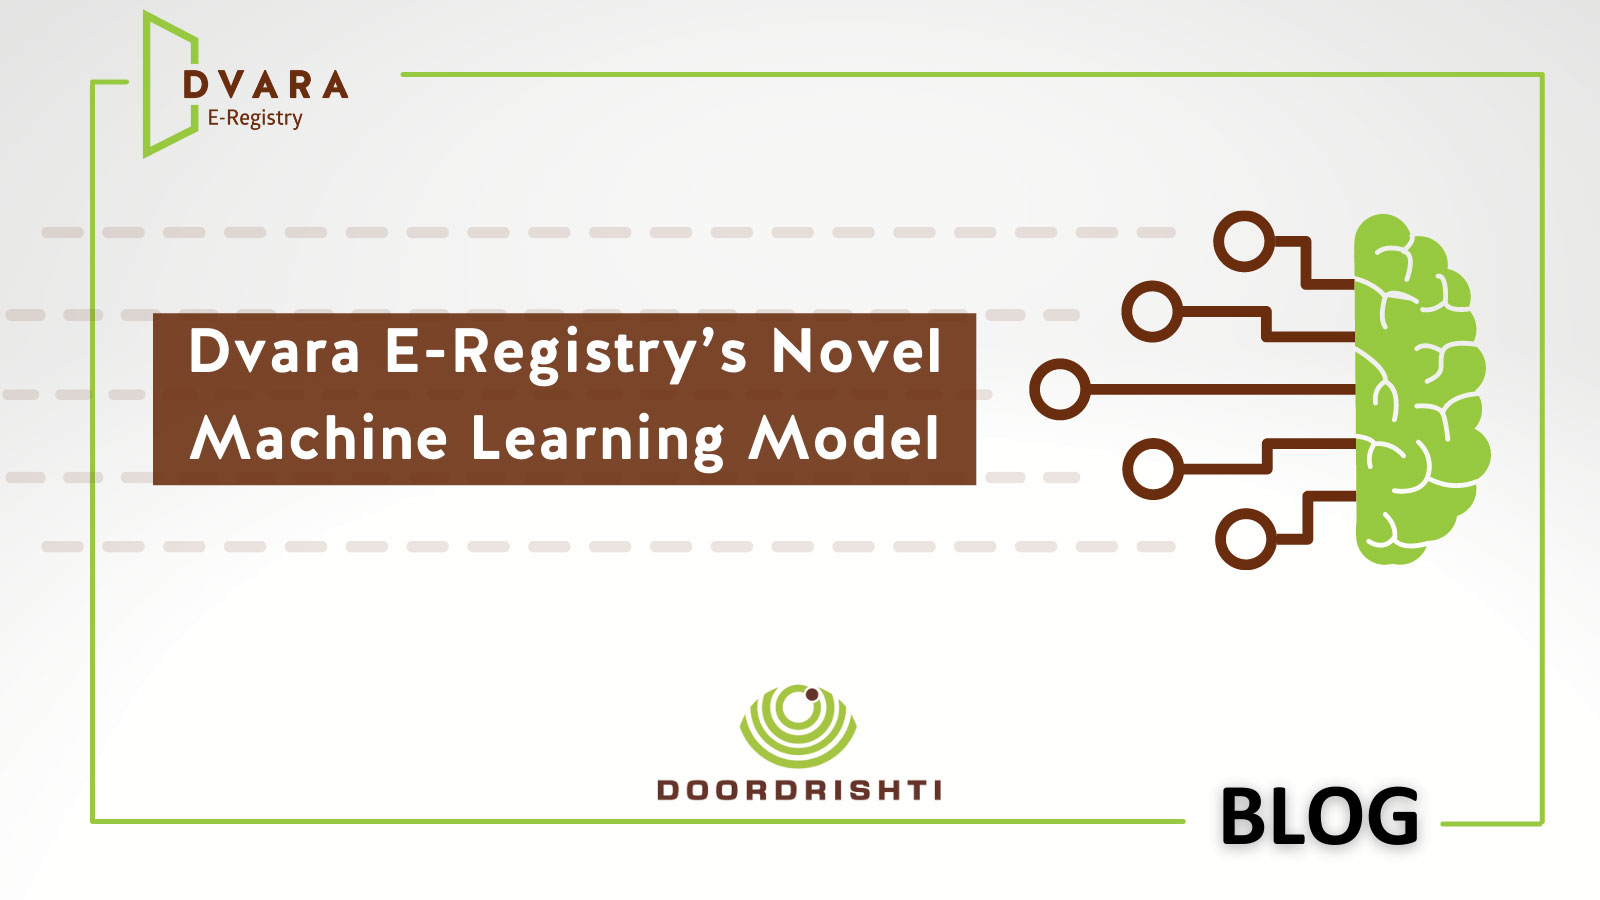 Dvara E-Registry’s Machine Learning Model Allows Observations Through Cloud Cover.